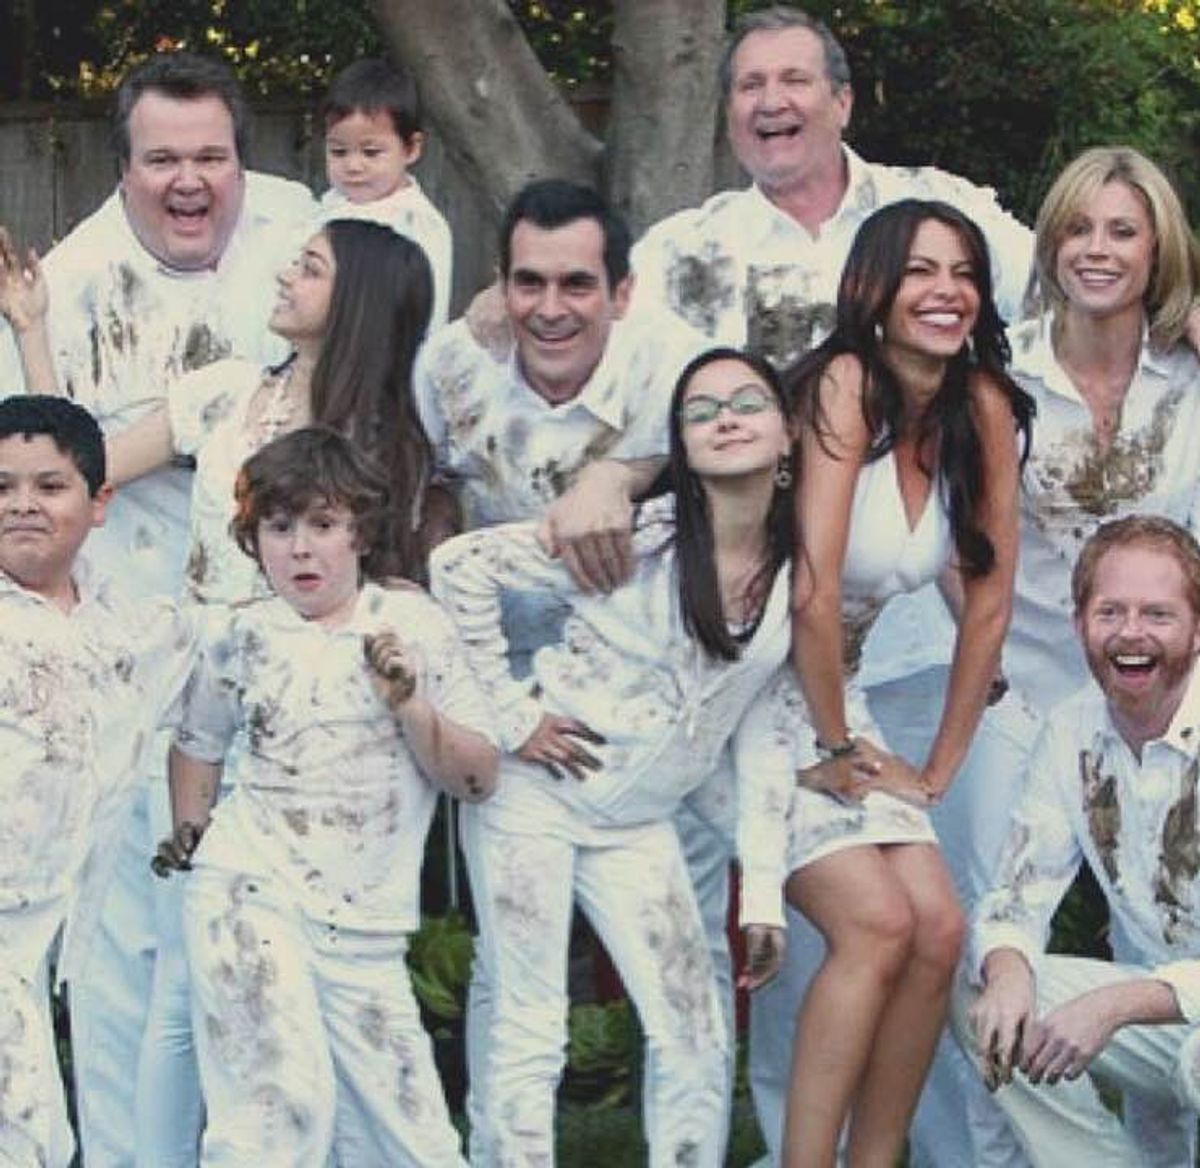 15 Lessons I Learned From "Modern Family"